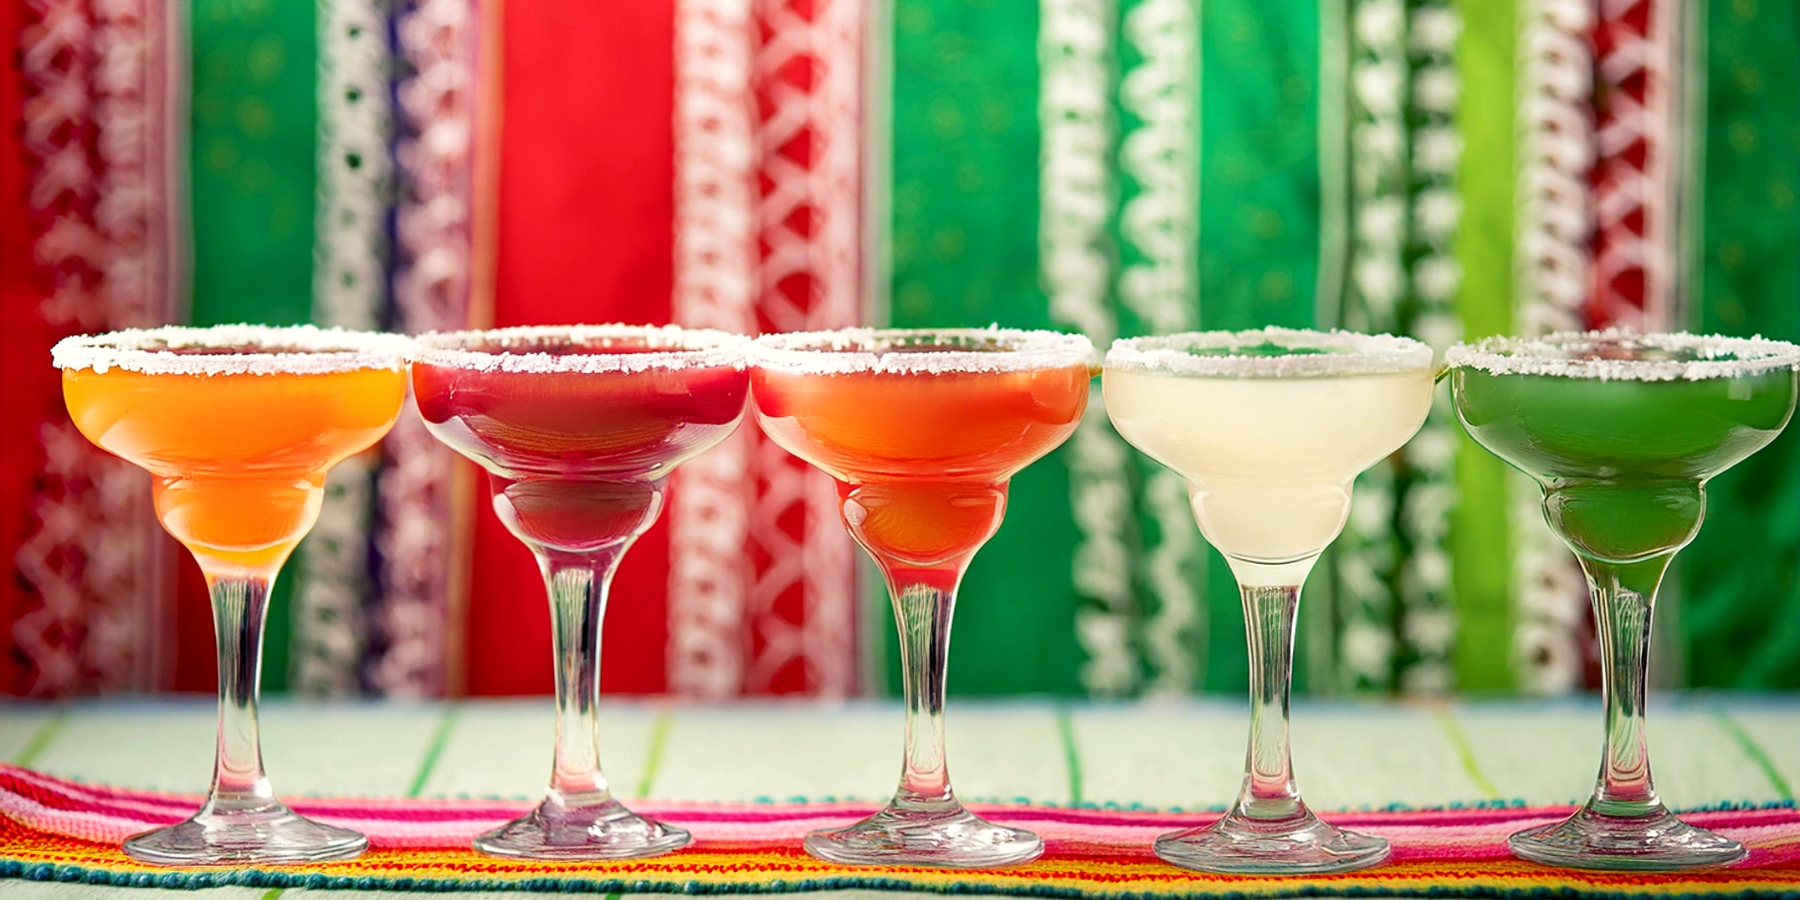 Colorful Margarita cocktails in a row with a Cinco de Mayo themed wallpaper in the background